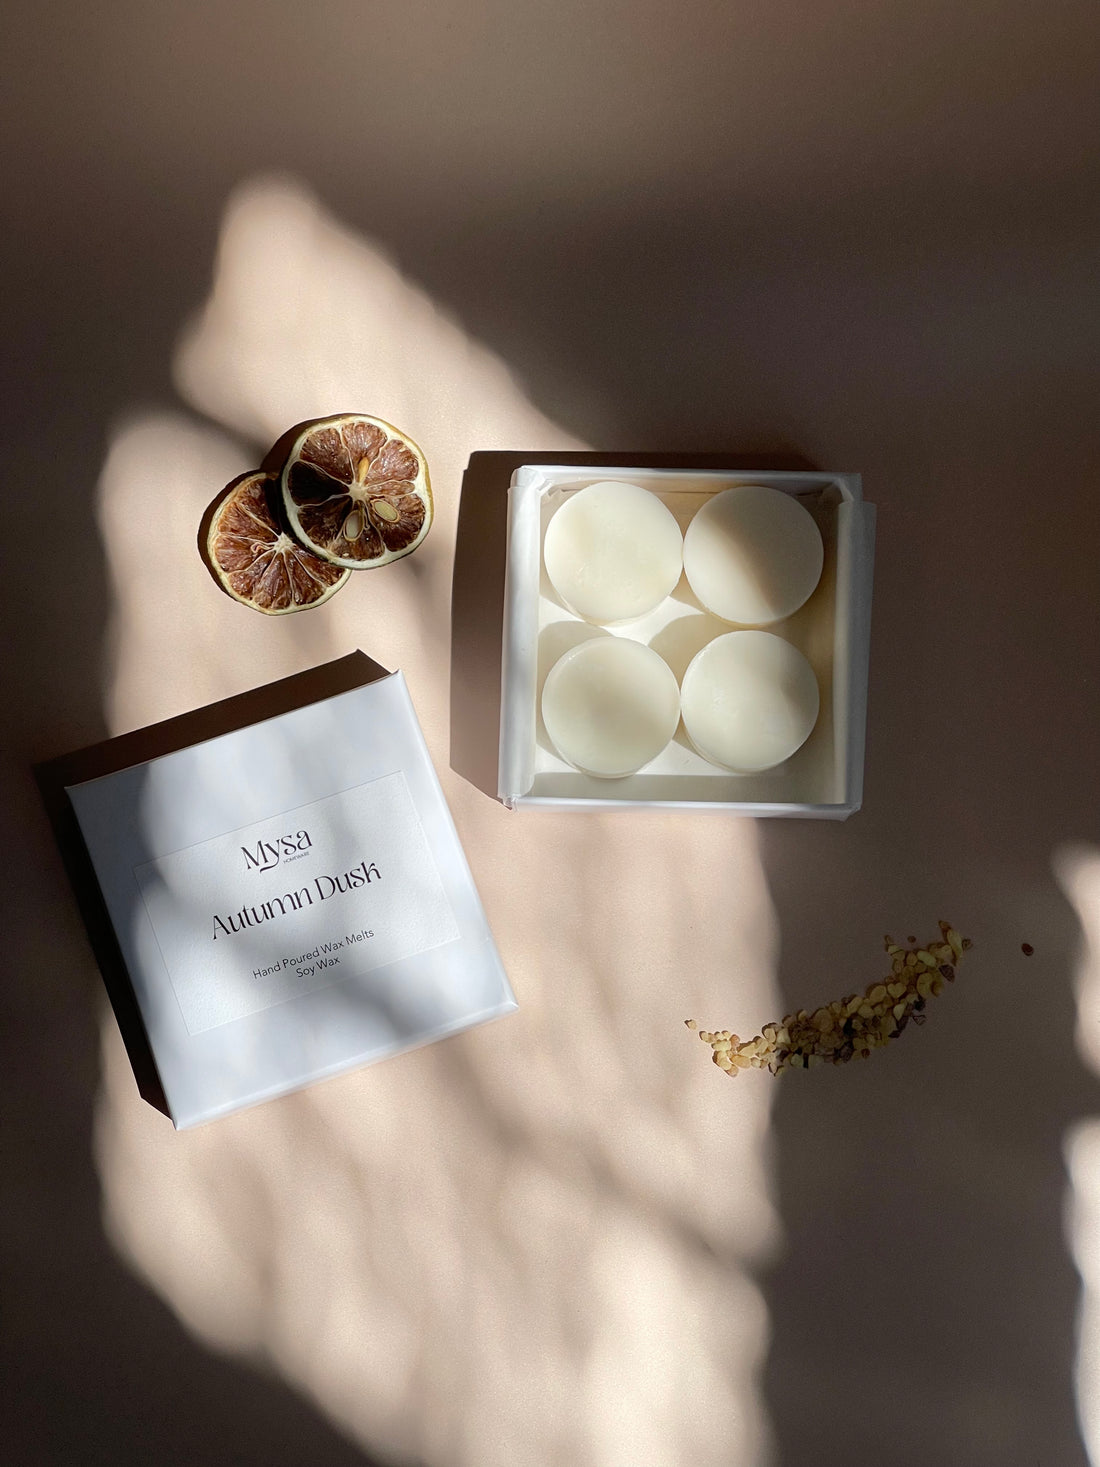 Autumn Dusk luxury scented wax melts in gift box, with soy wax and frankincense &amp; bergamot fragrance.